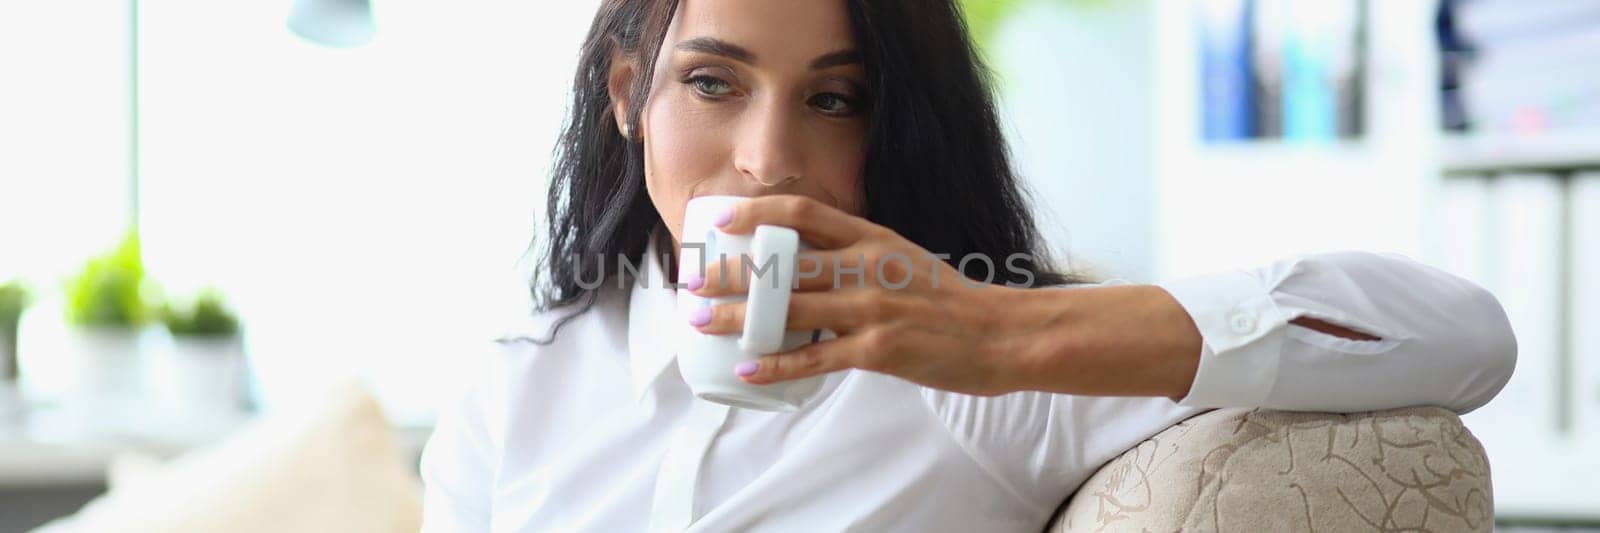 Thoughtful sad woman drinking from cup in office by kuprevich